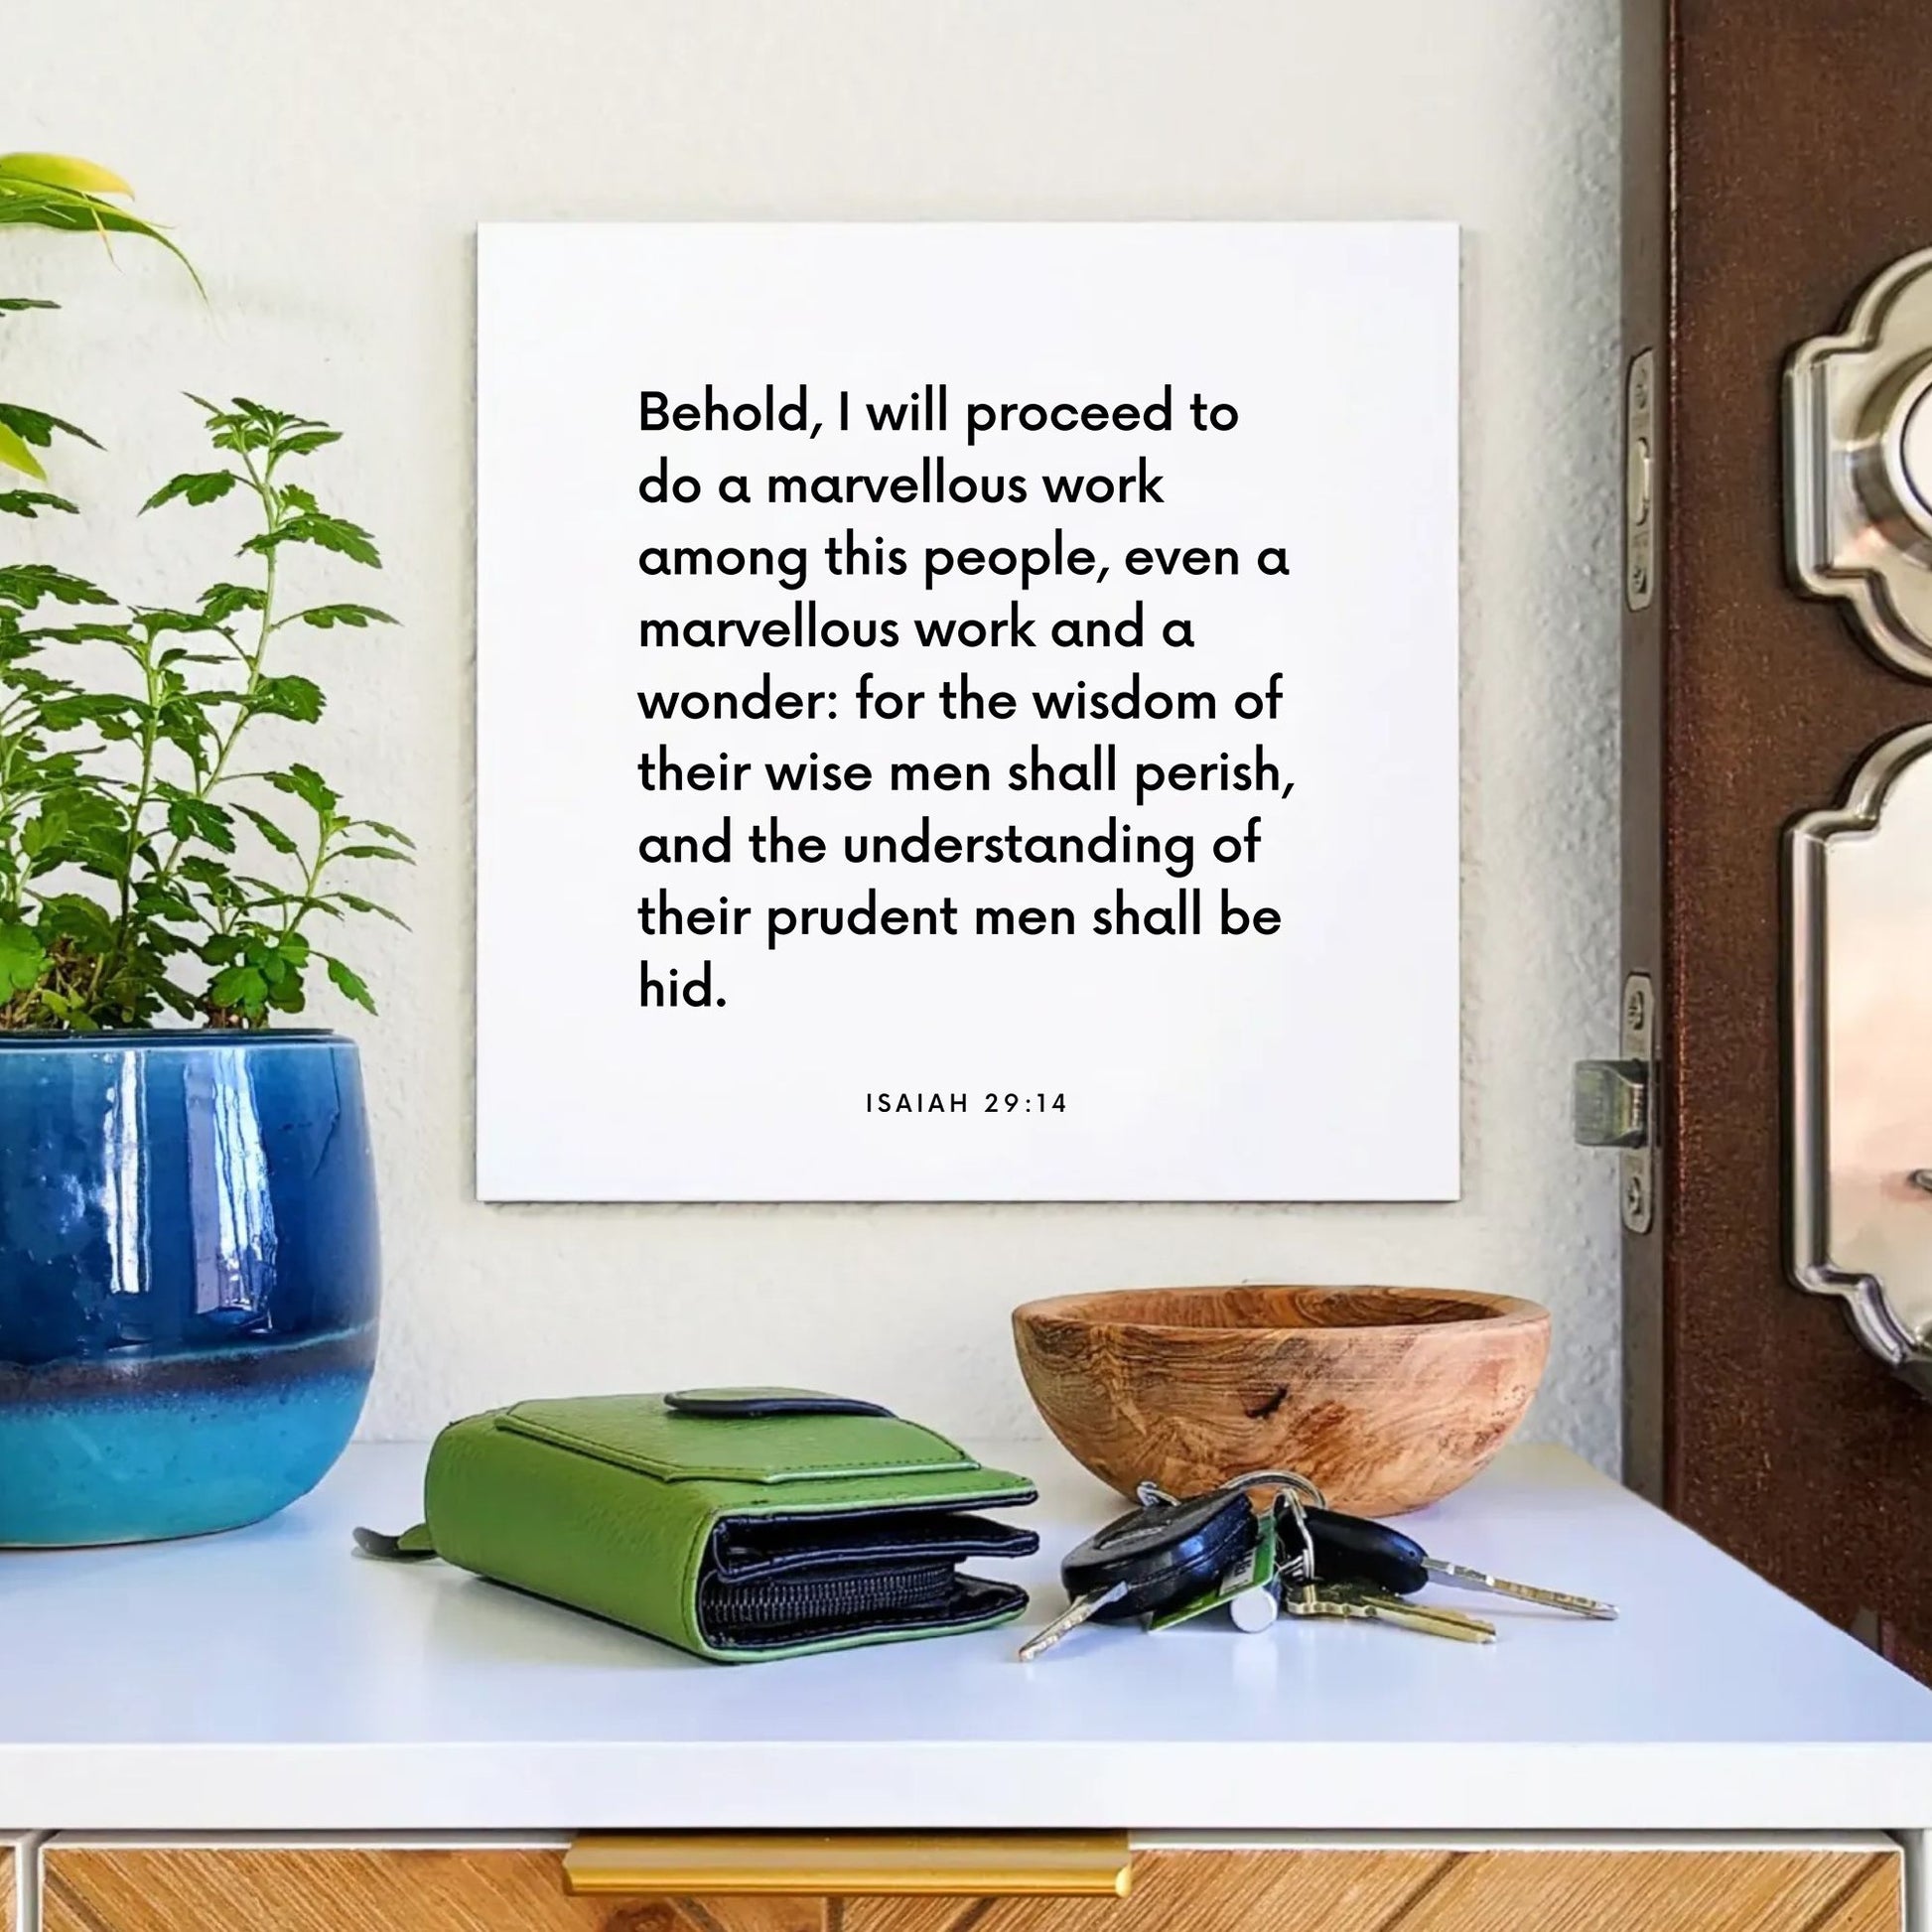 Entryway mouting of the scripture tile for Isaiah 29:14 - "I will do a marvellous work and a wonder"